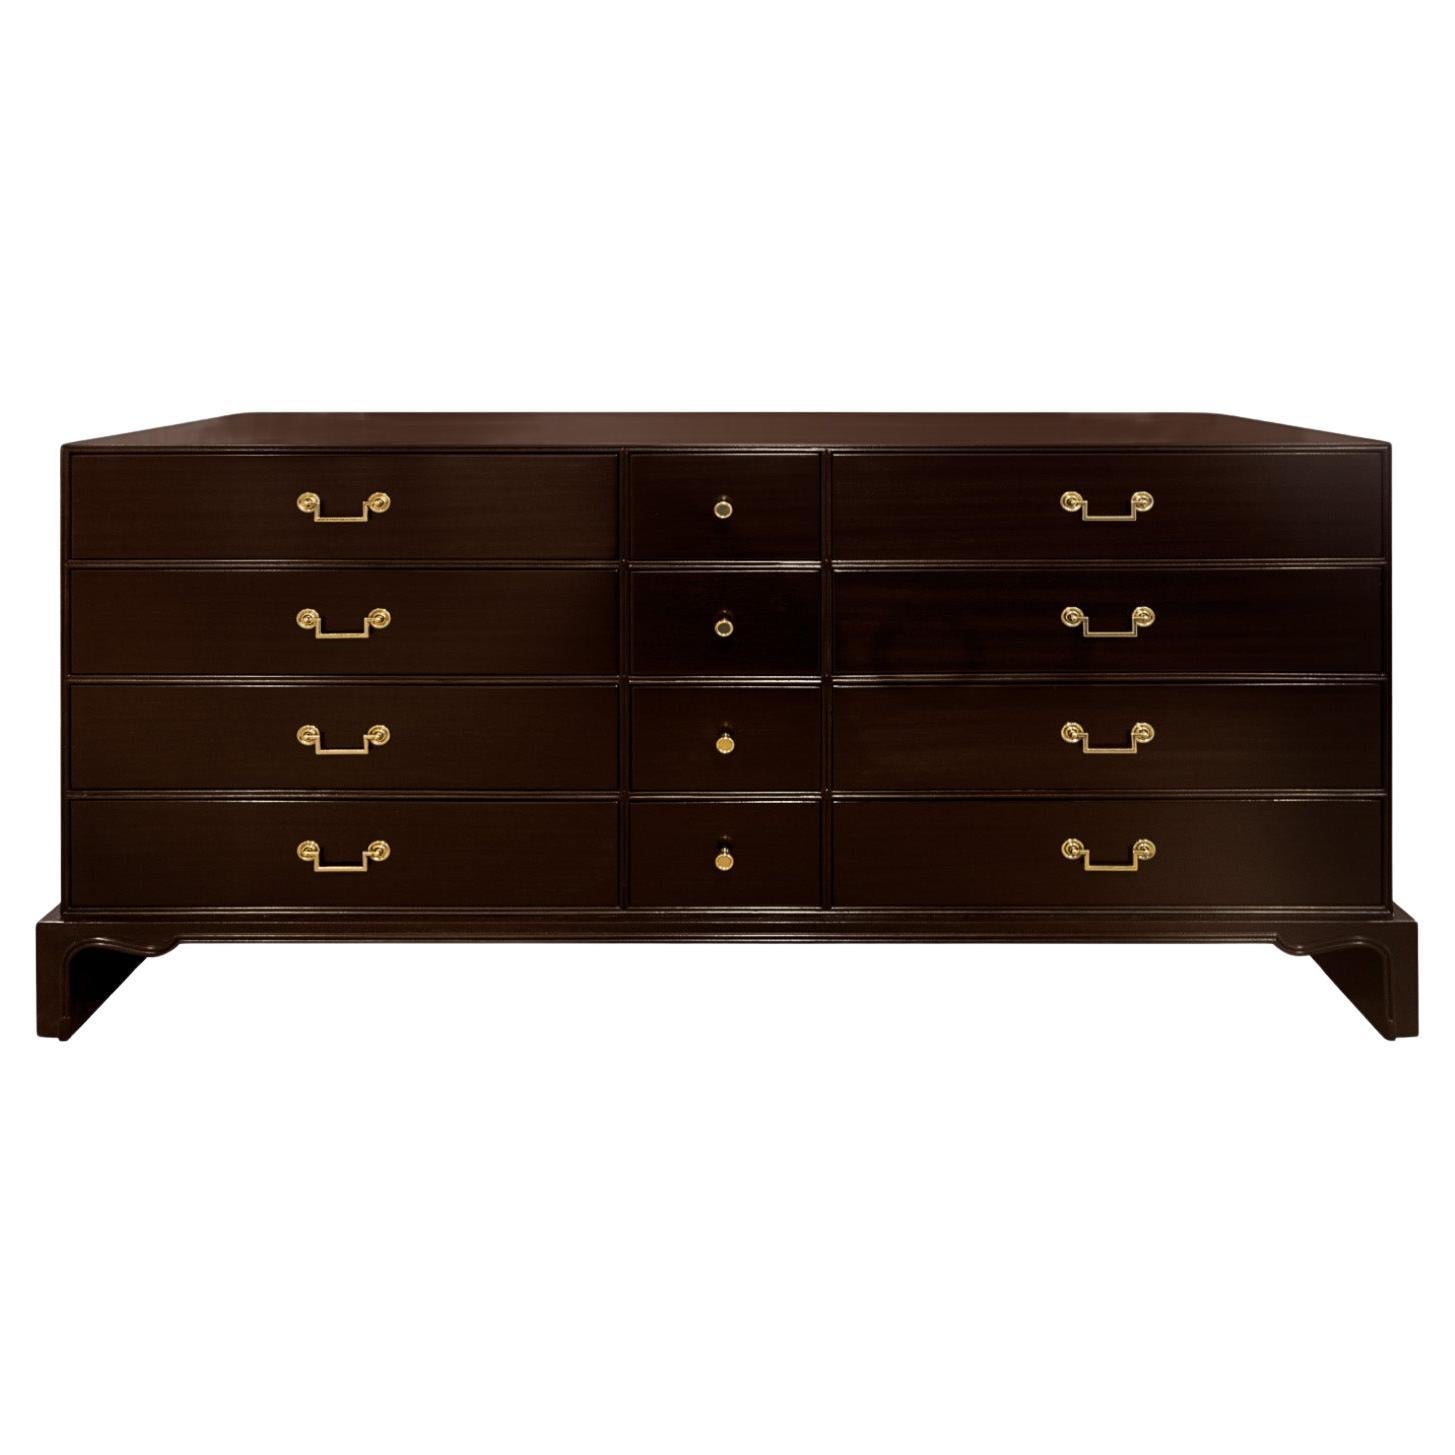 Tommi Parzinger Elegant Chest Of Drawers with Brass Pulls 1940s (Signed) For Sale